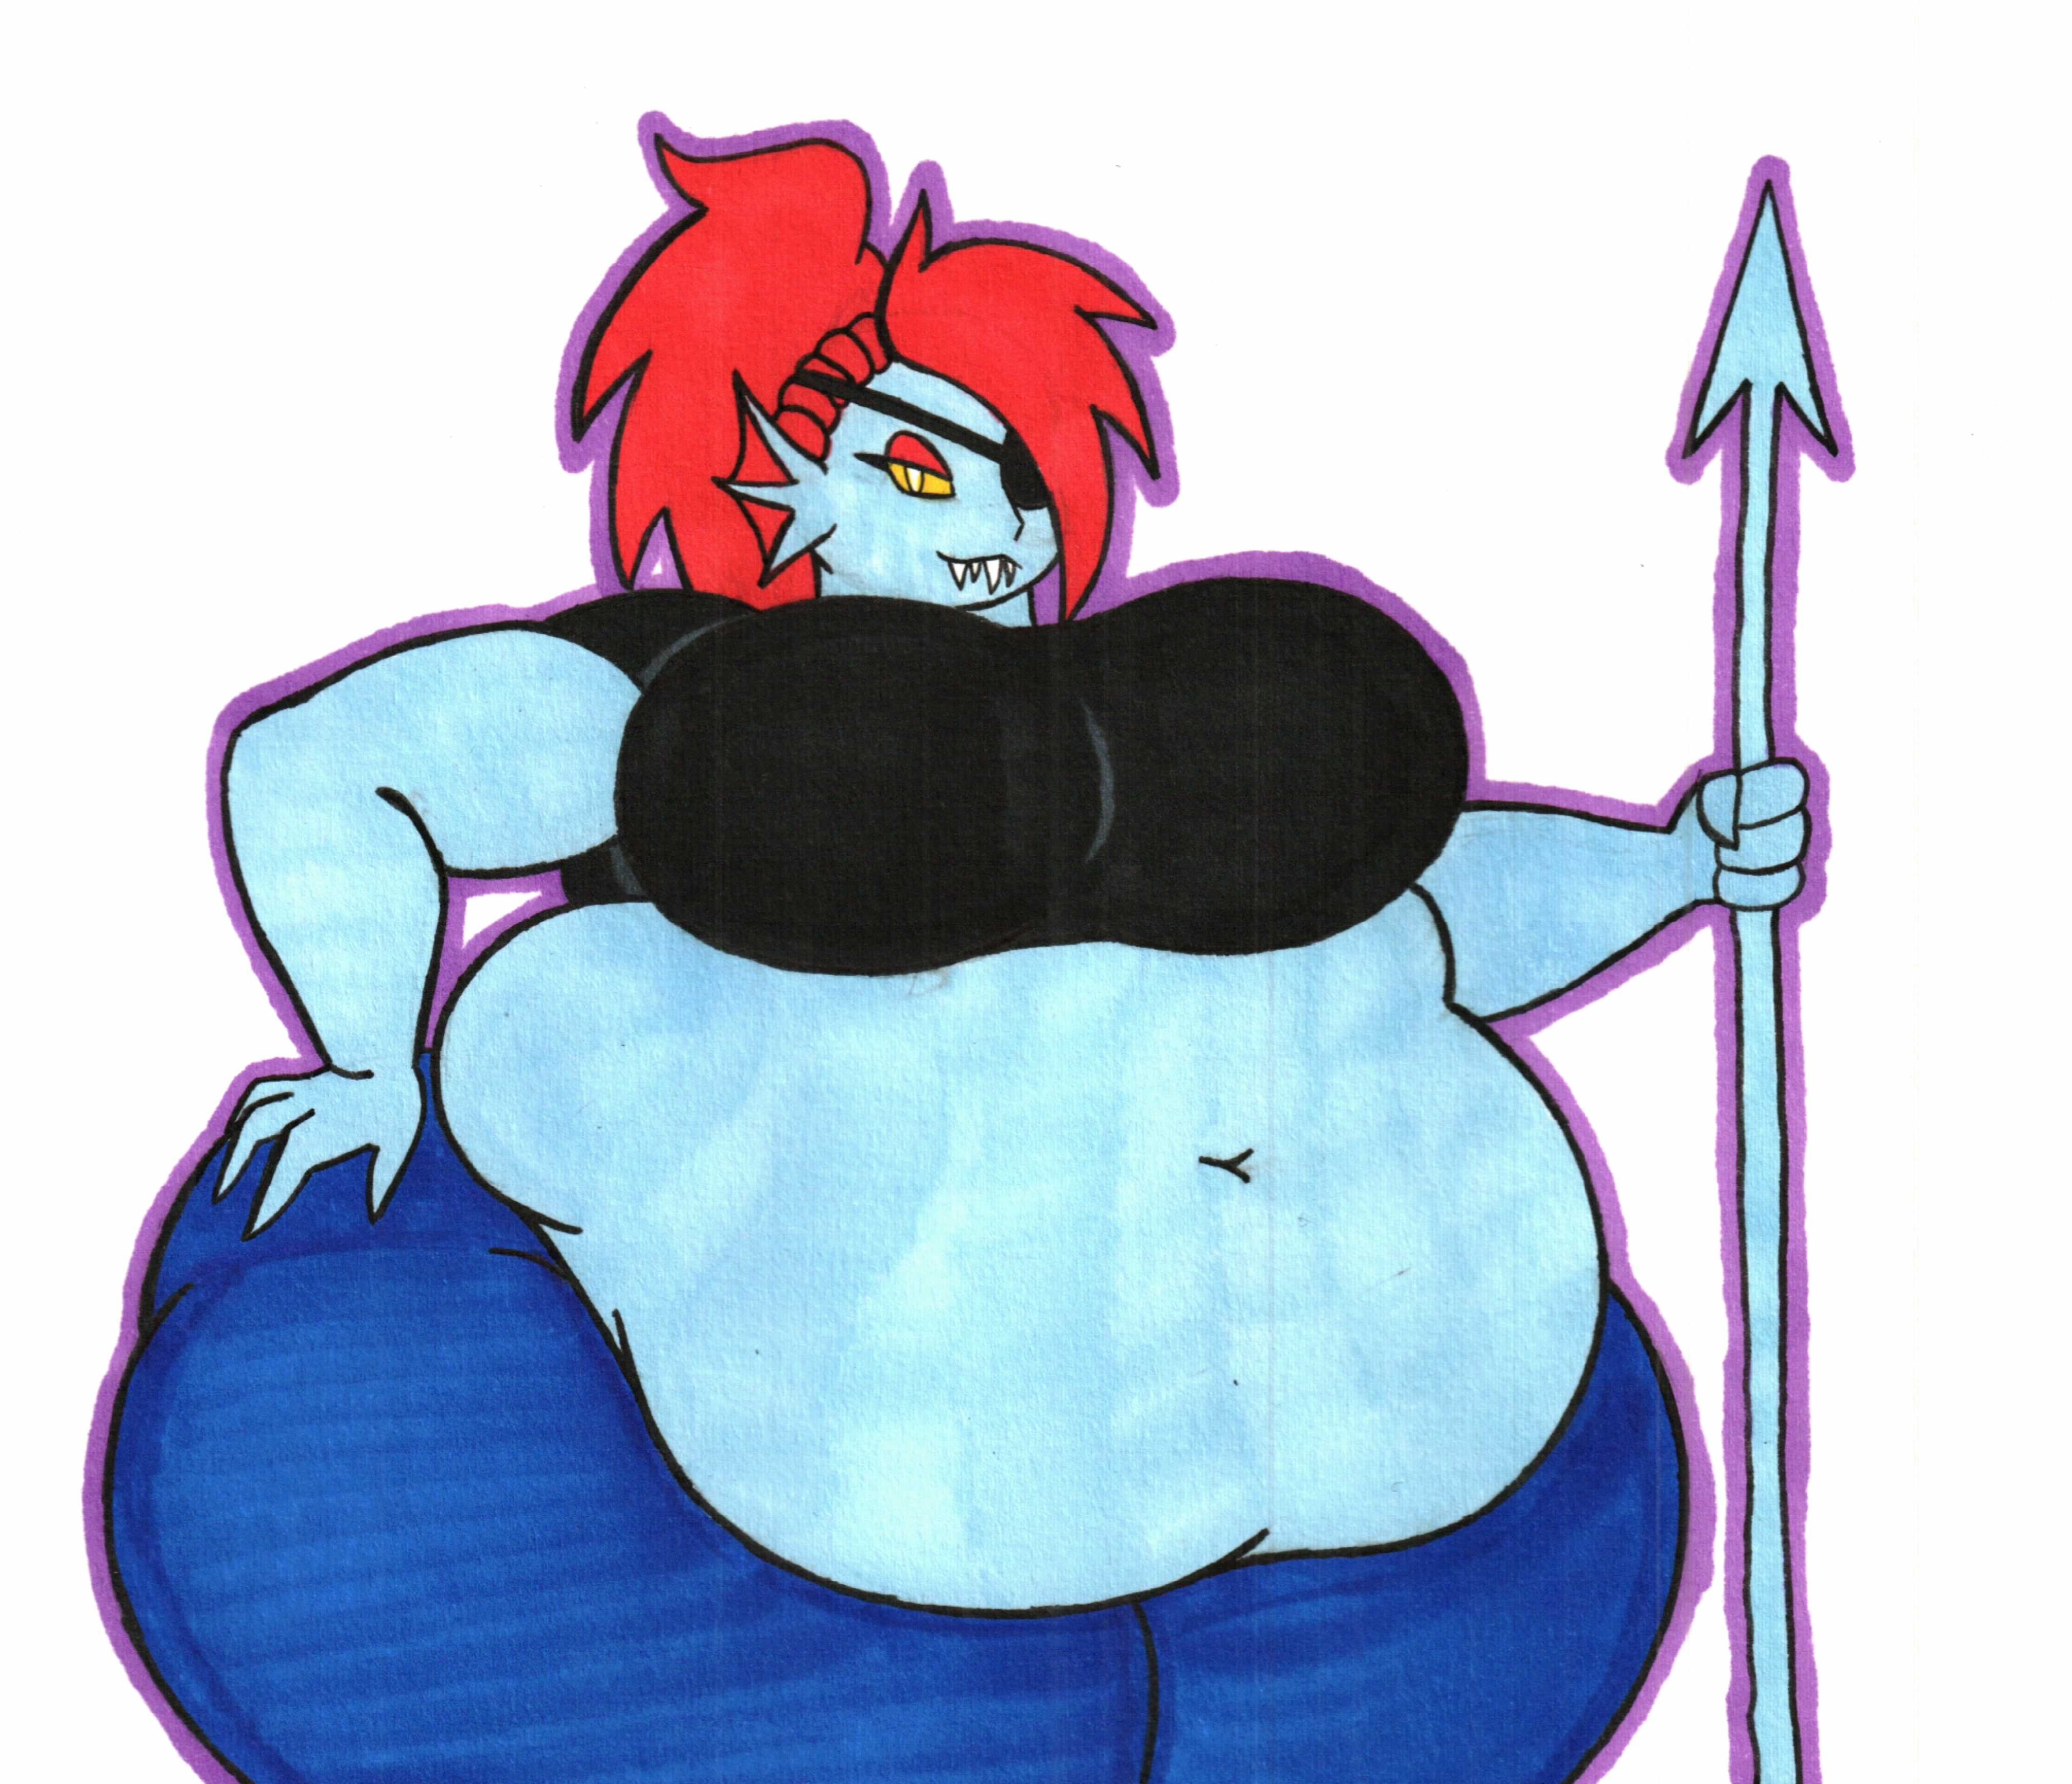 Gallery of Morbidly Obese Undyne Undertale.